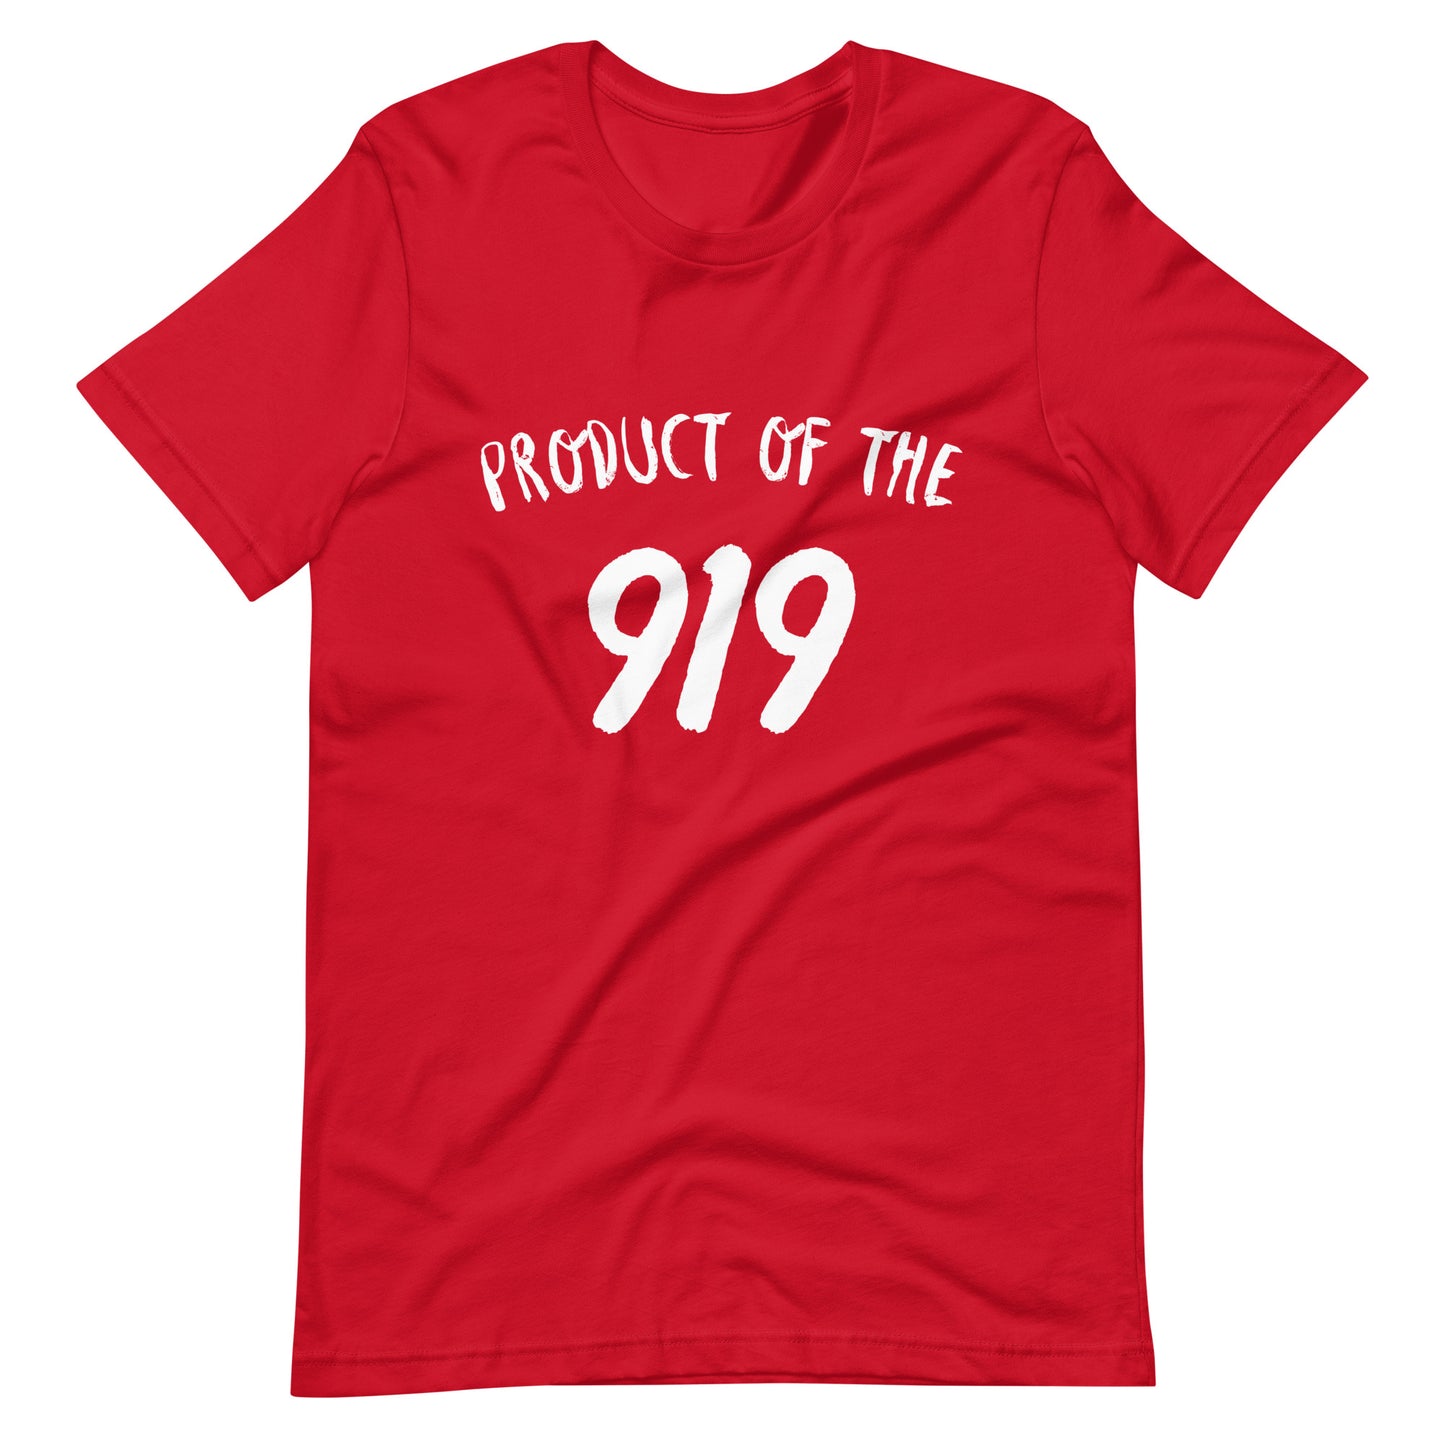 Product of the "919" Unisex t-shirt